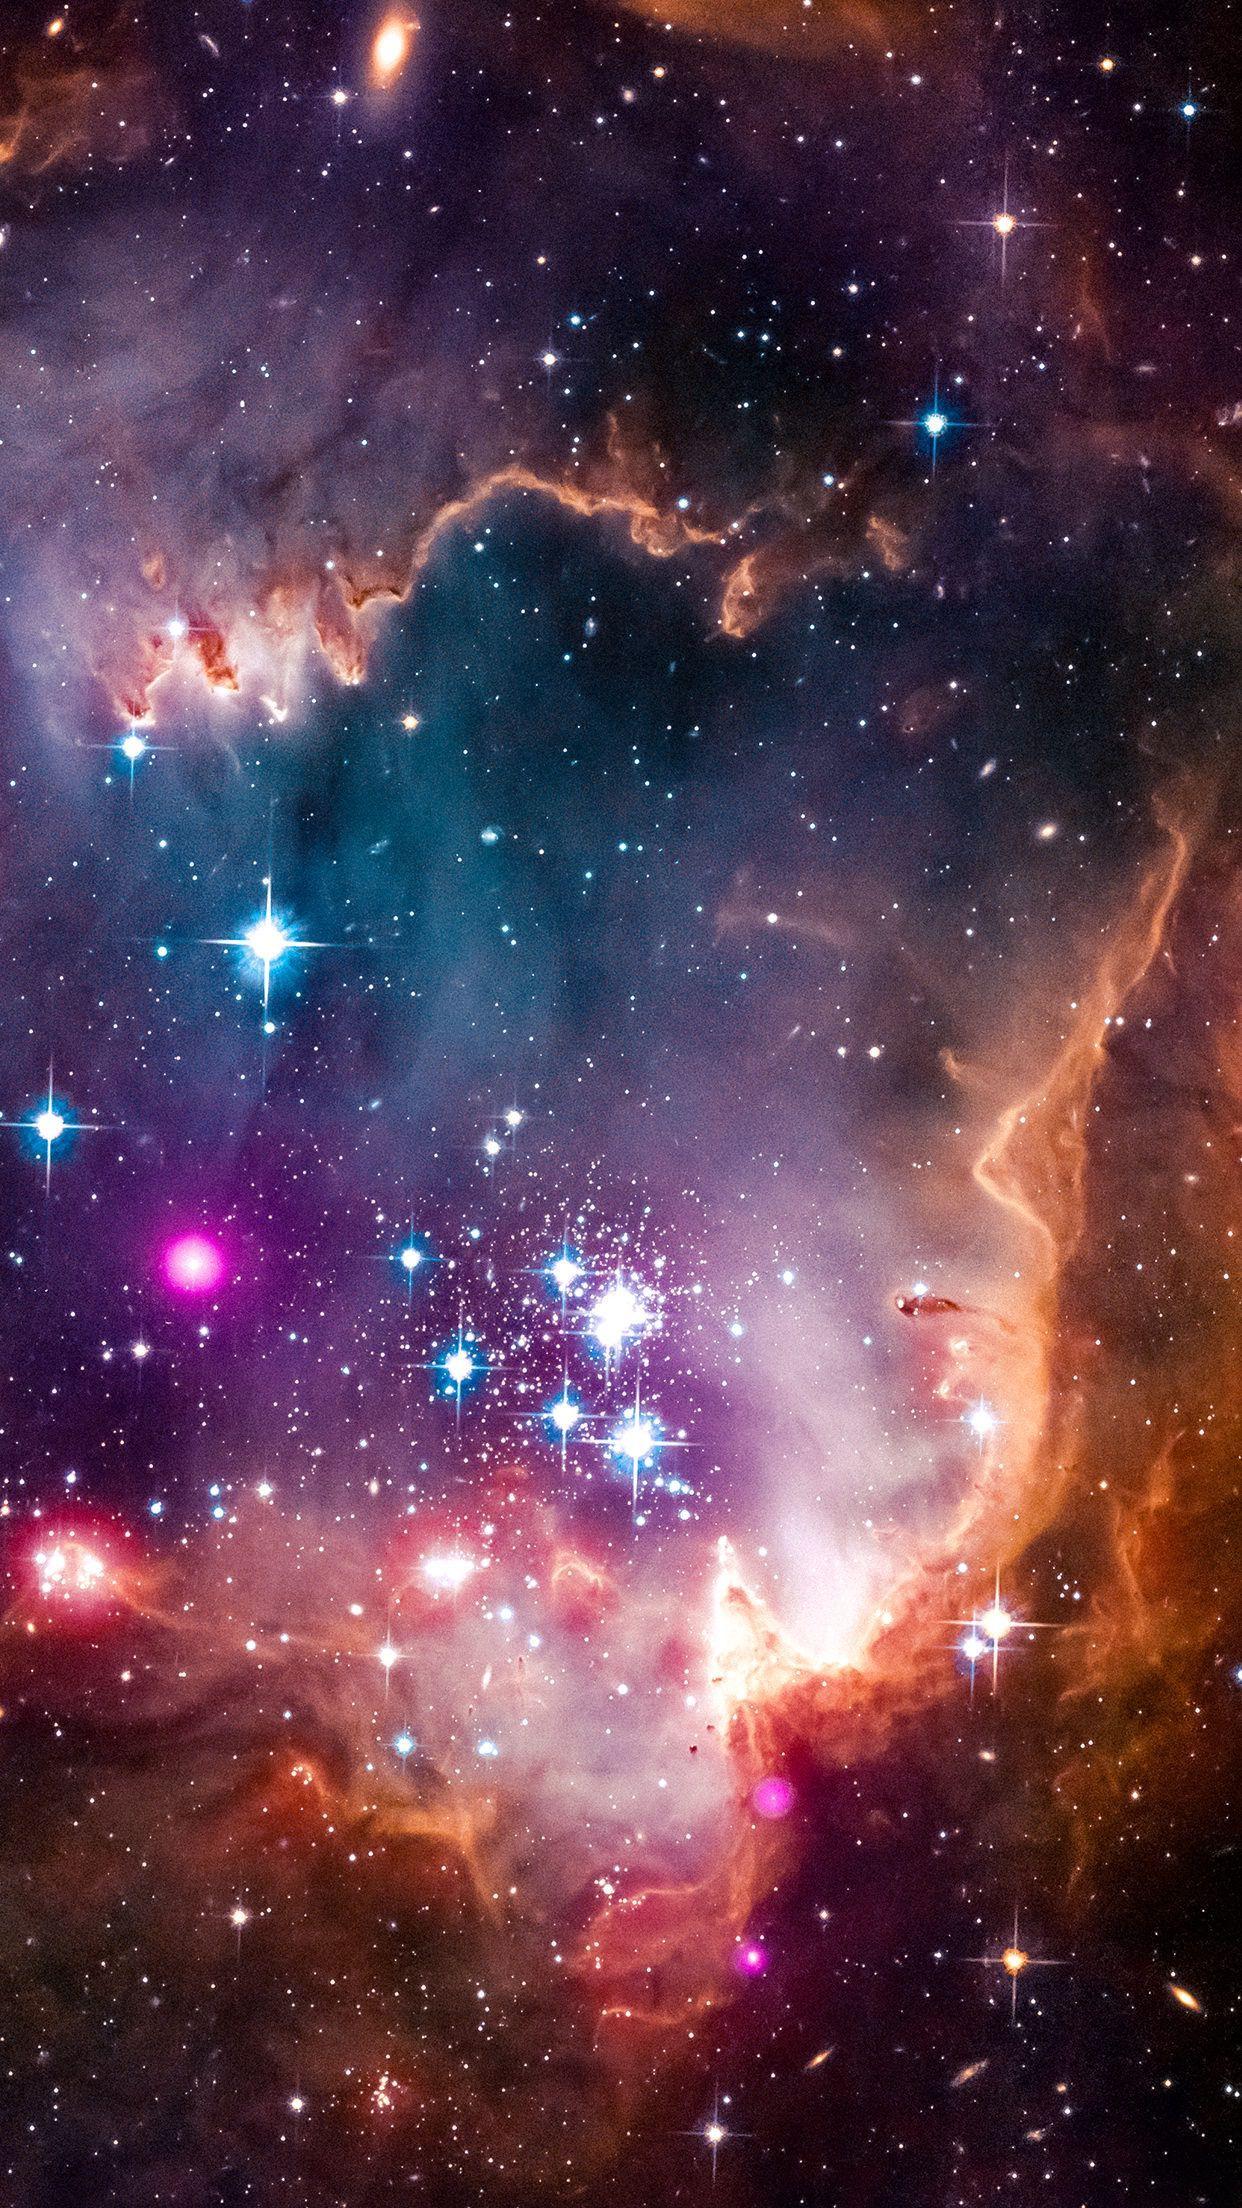 Space Wallpaper For iPhone X You Should Download (Ep. 4)